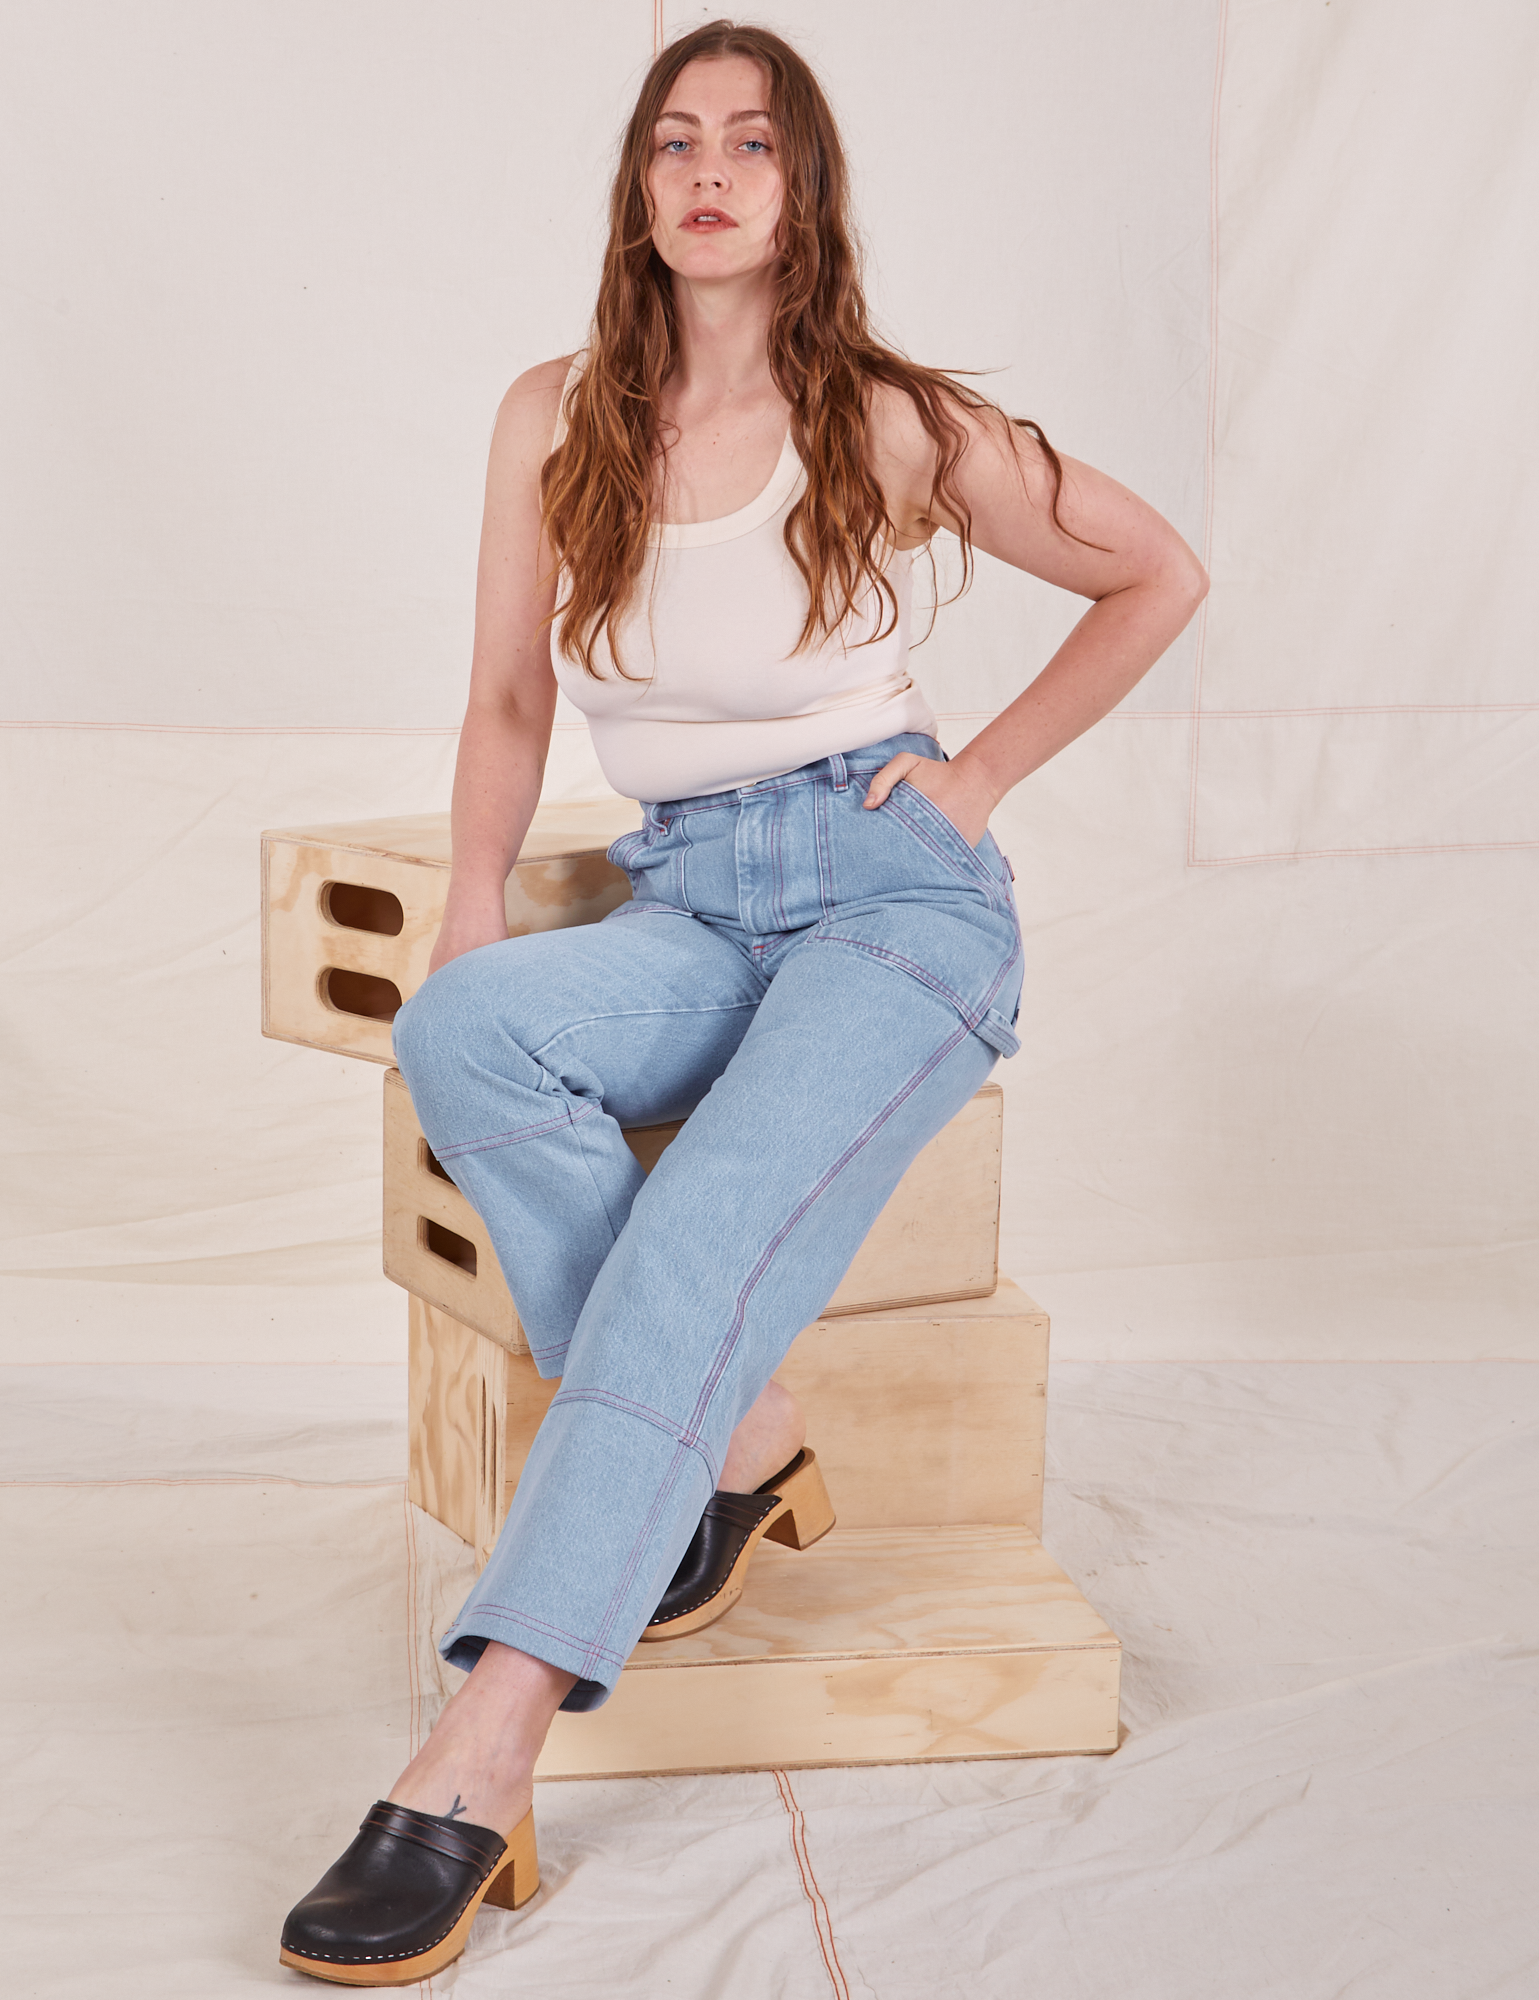 Allison is sitting on a stack of wooden crates. She is wearing Carpenter Jeans in Light Wash paired with a vintage off-white Tank Top.